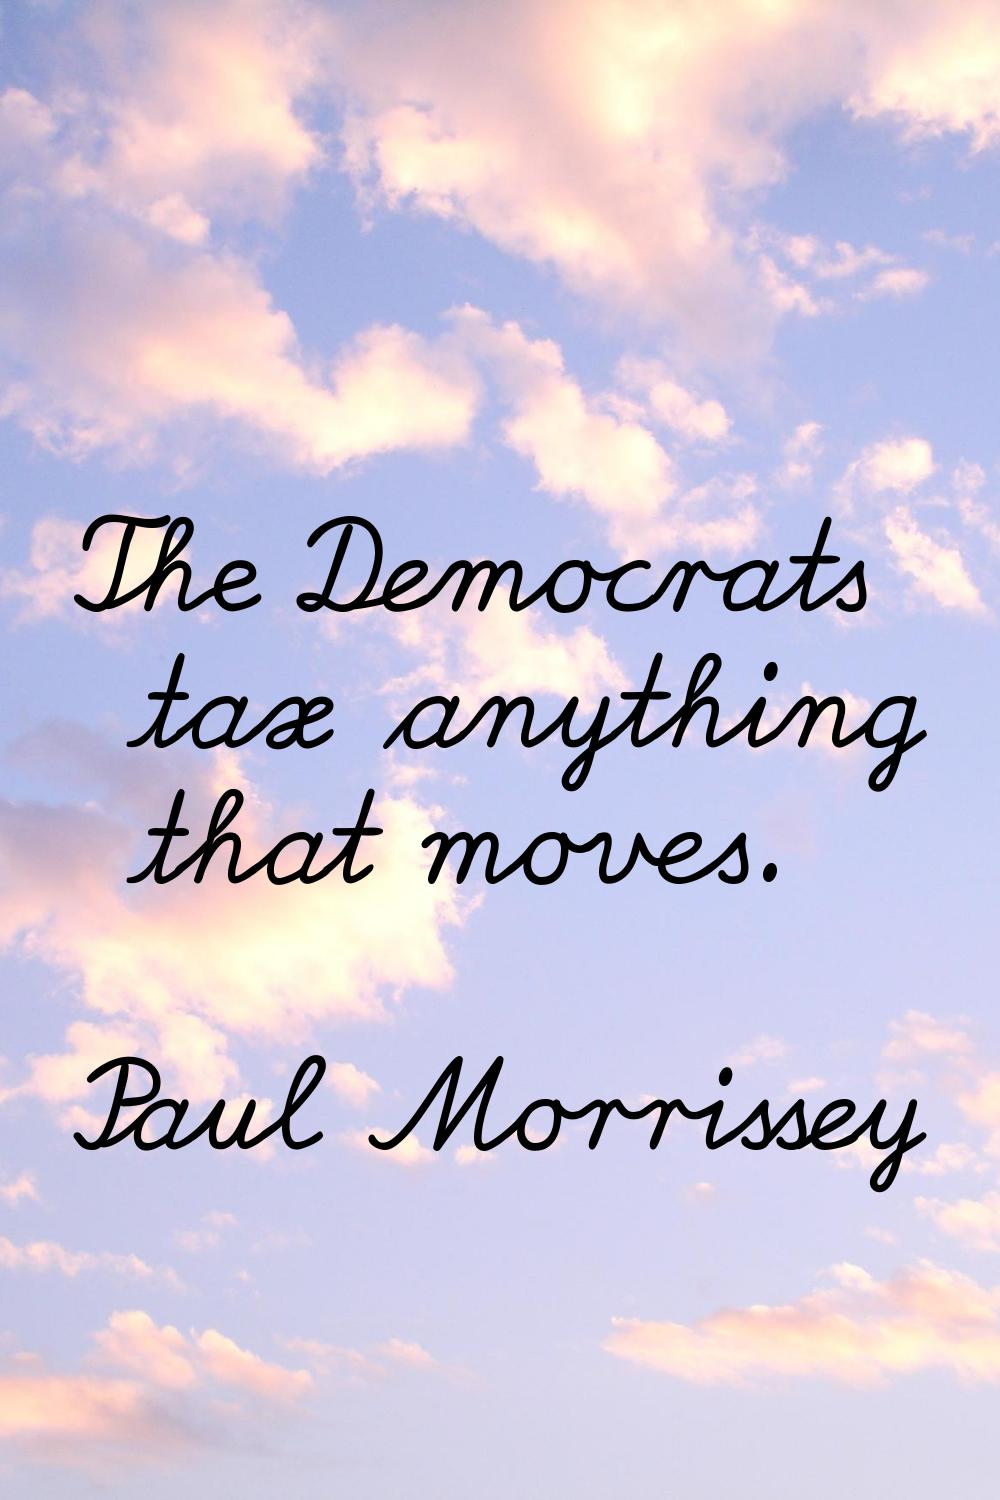 The Democrats tax anything that moves.